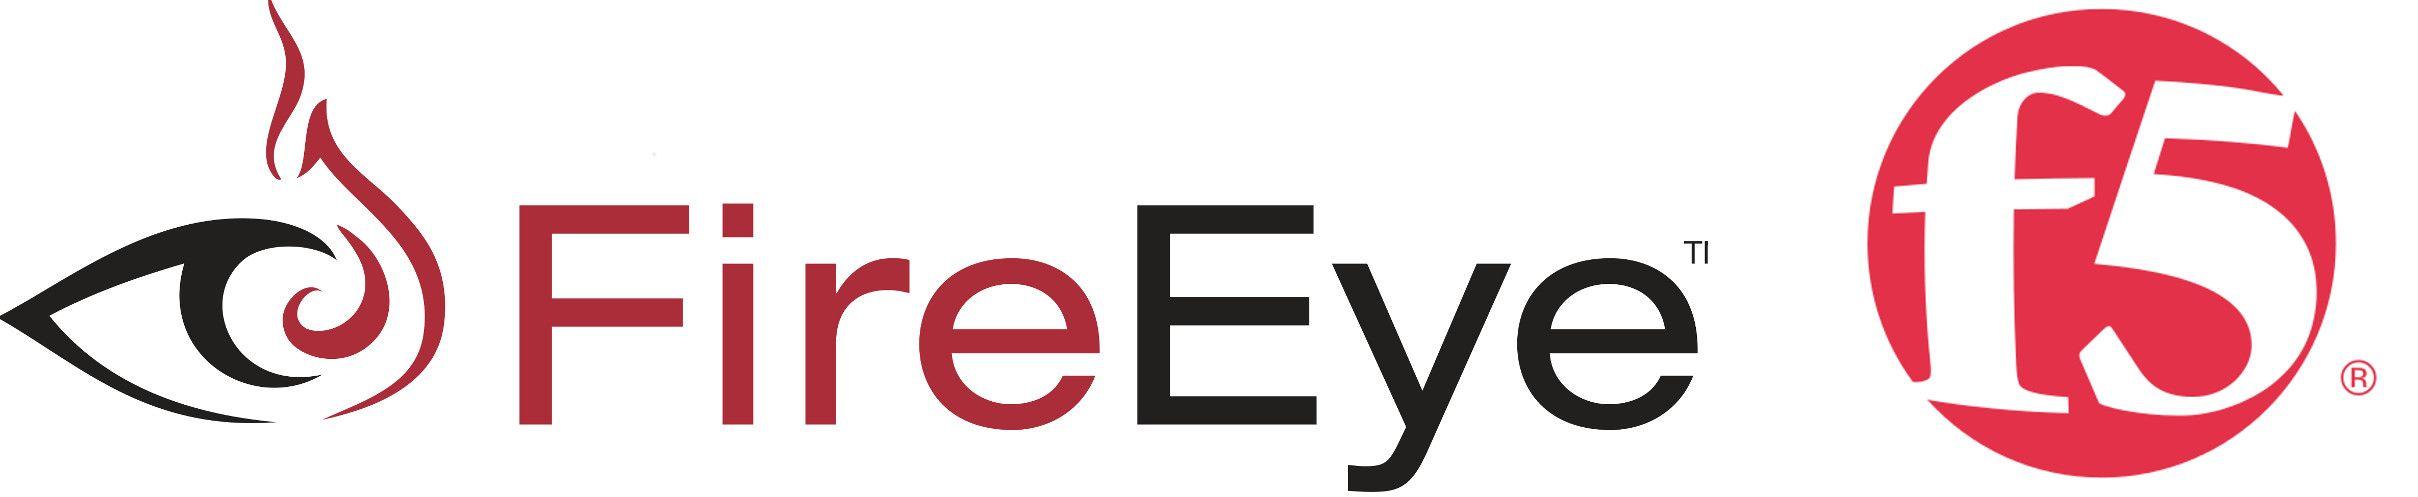 FireEye Logo - In Case You Missed It-FireEye Top Stories 10/9 « In Case You Missed ...